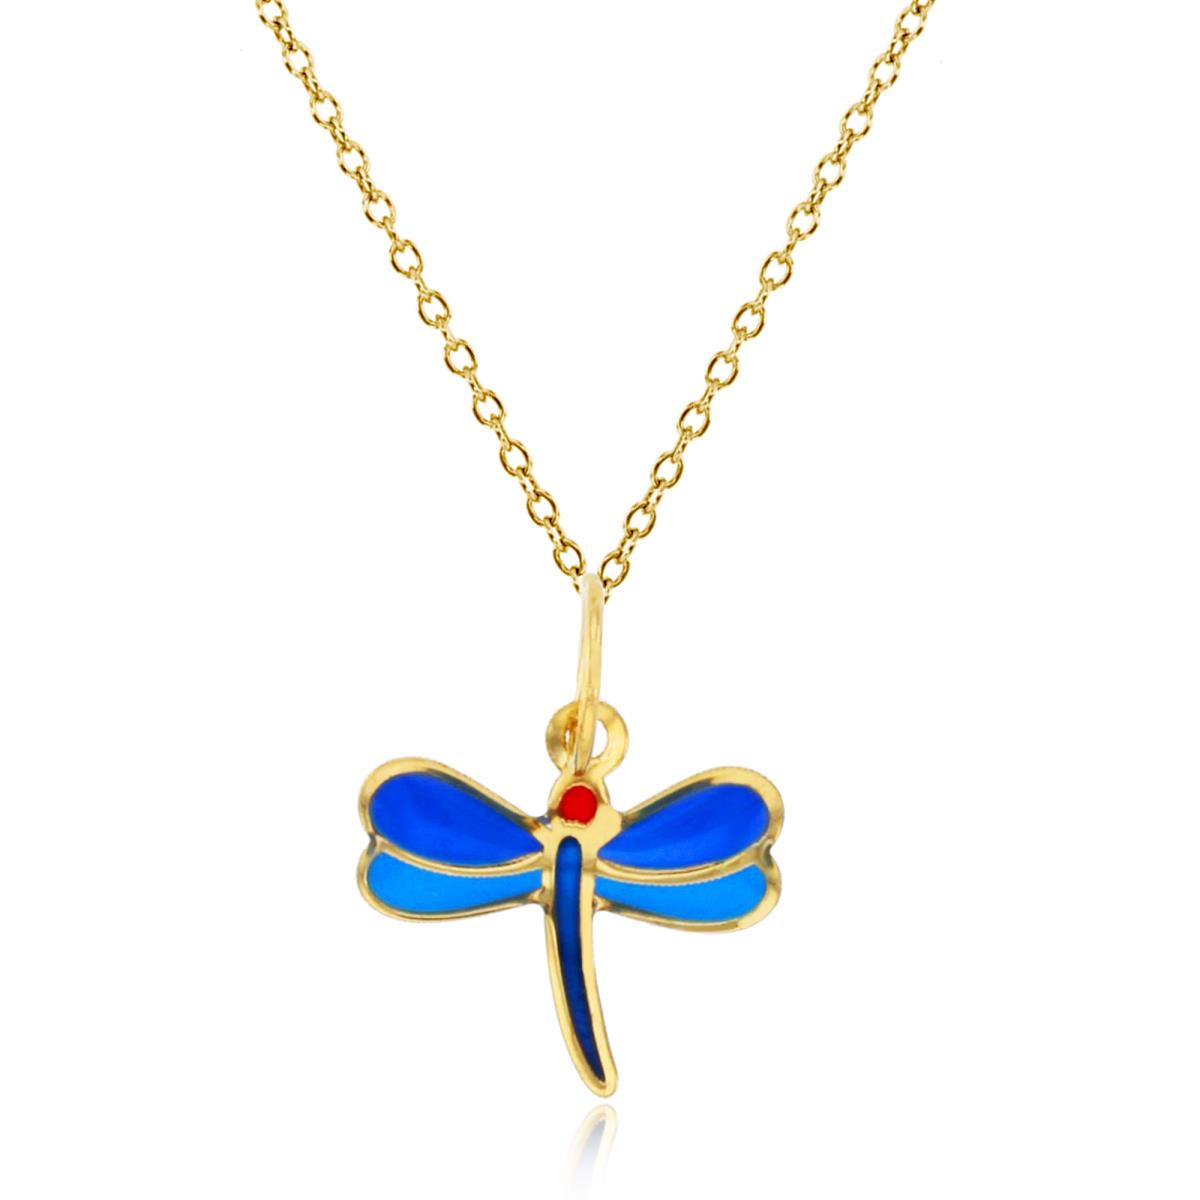 10K Yellow Gold Enamel 16x12mm Dragonfly 18" 020 Rollo Chain Necklace